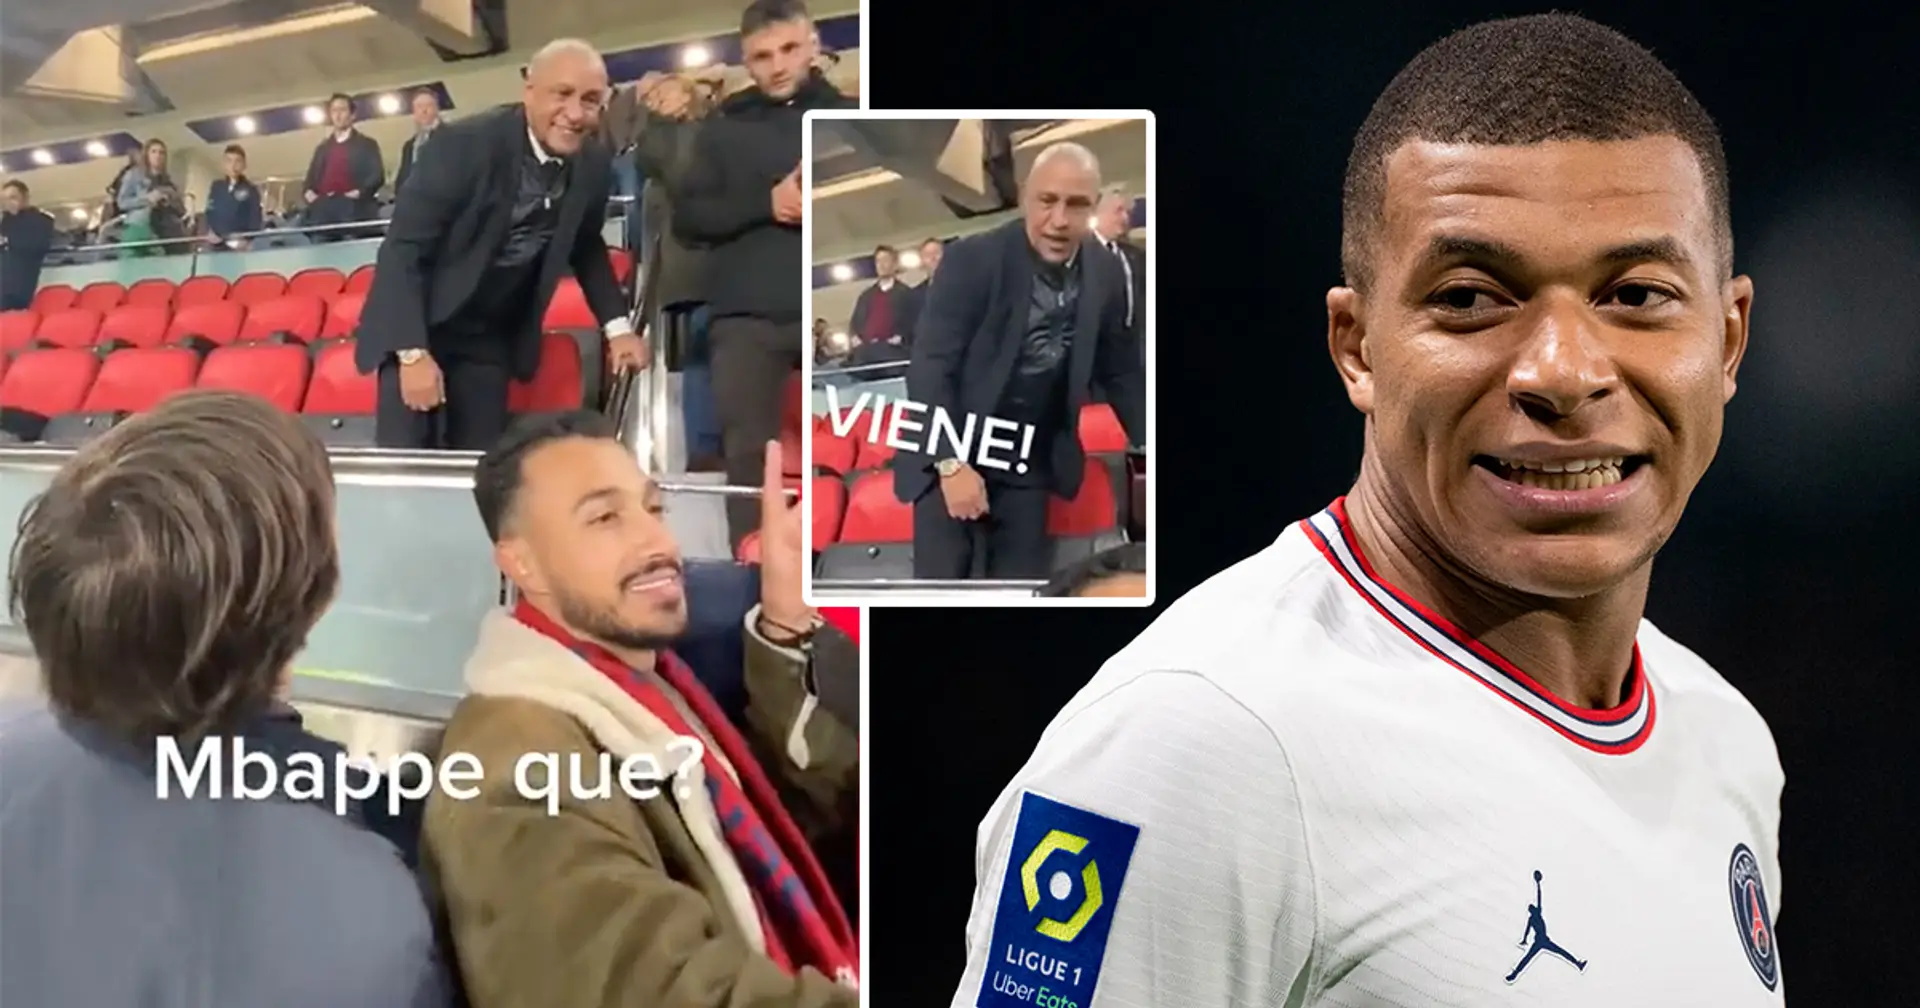 Roberto Carlos gives definite answer when asked if Mbappe will sign for Real Madrid